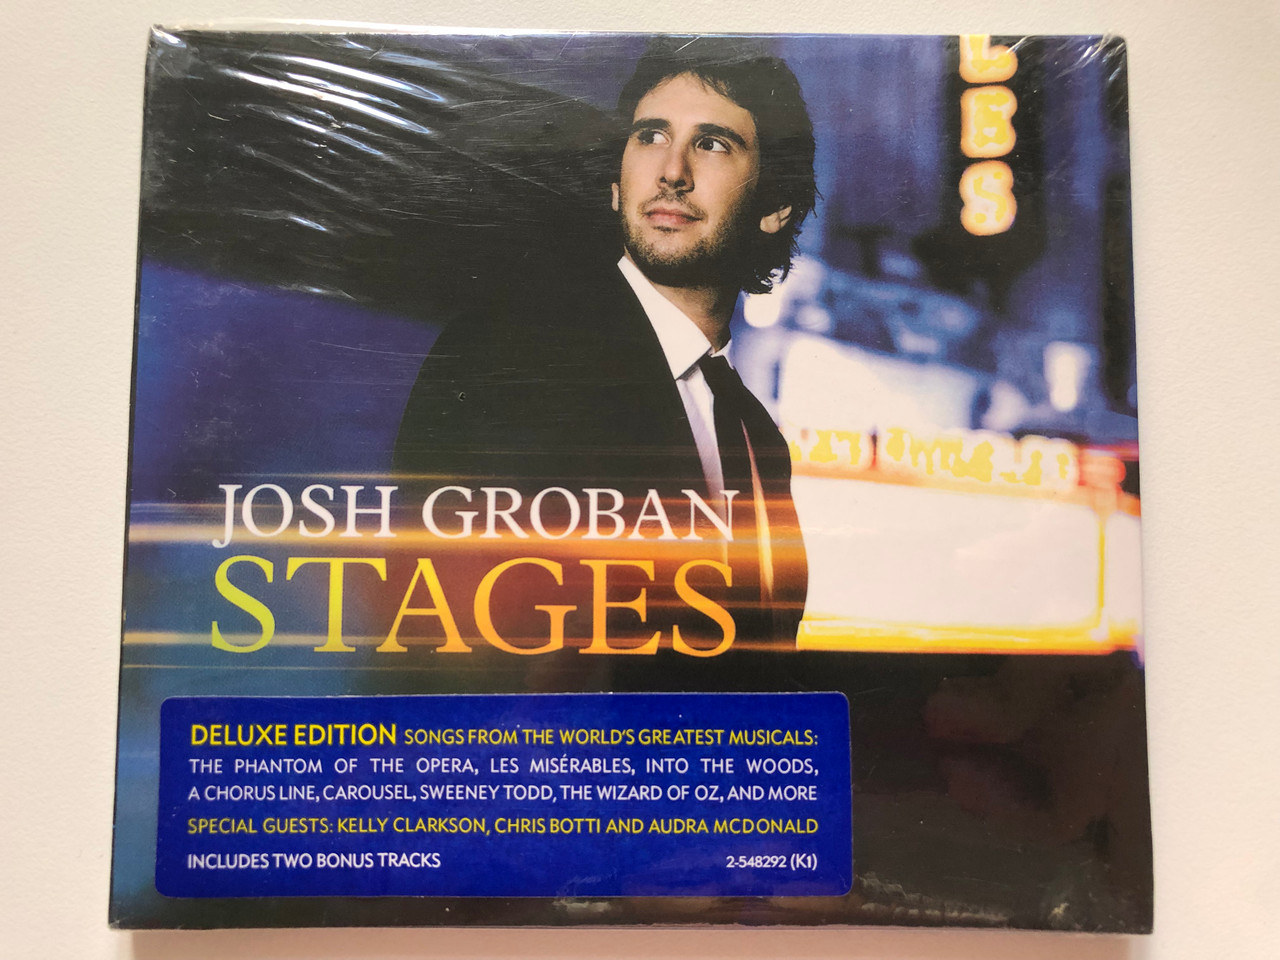 https://cdn10.bigcommerce.com/s-62bdpkt7pb/products/0/images/222849/Josh_Groban_Stages_Deluxe_Edition_Songs_From_The_Worlds_Greatest_Musicals_The_Phantom_Of_The_Opera_Les_Misrables_Into_The_Woods_A_Chorus_Line_Carousel_Sweeney_Todd_Reprise_Records_1__50030.1650378614.1280.1280.JPG?c=2&_gl=1*1g51whm*_ga*MjA2NTIxMjE2MC4xNTkwNTEyNTMy*_ga_WS2VZYPC6G*MTY1MDM3NjM3NC4zNjEuMS4xNjUwMzc3MzczLjI2